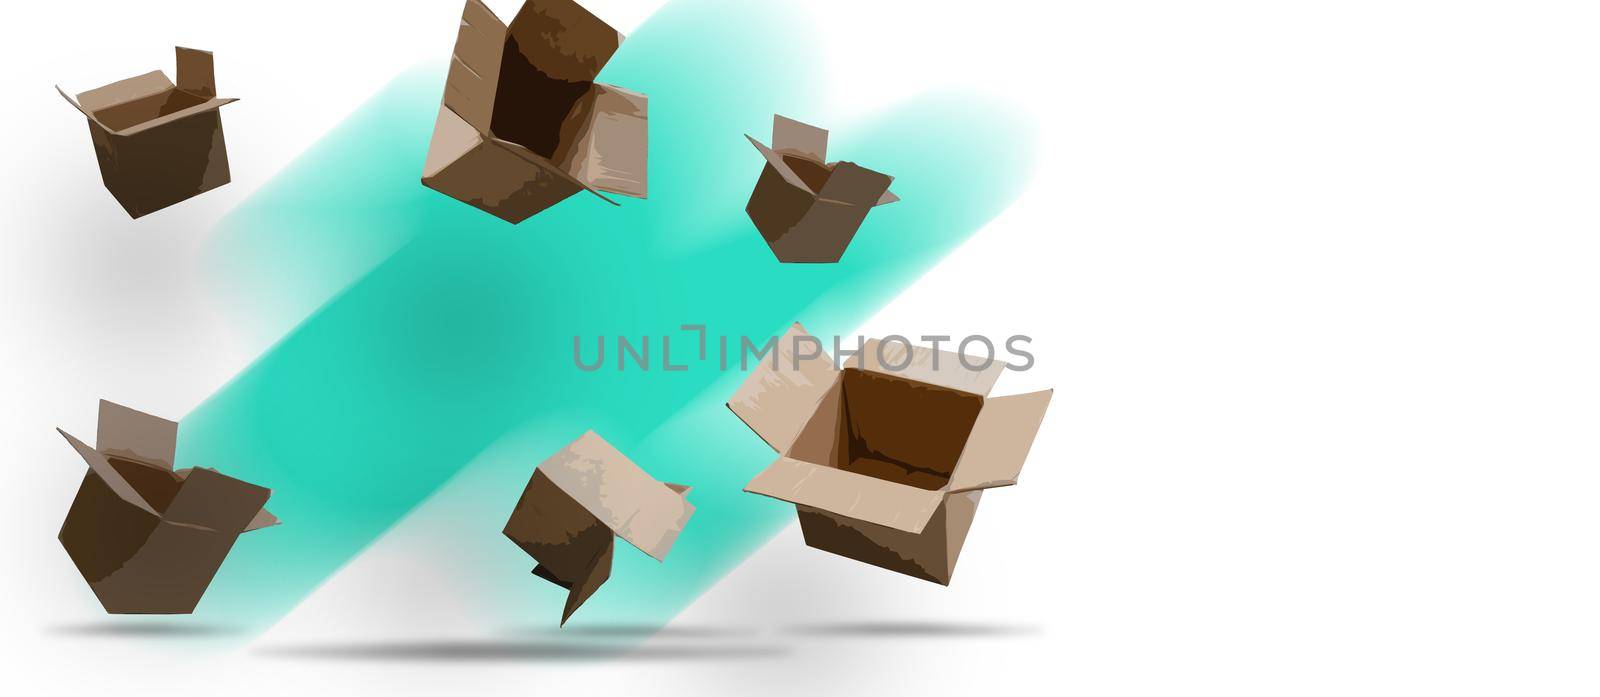 Ilustration of a set of different cardboard boxes by Andelov13